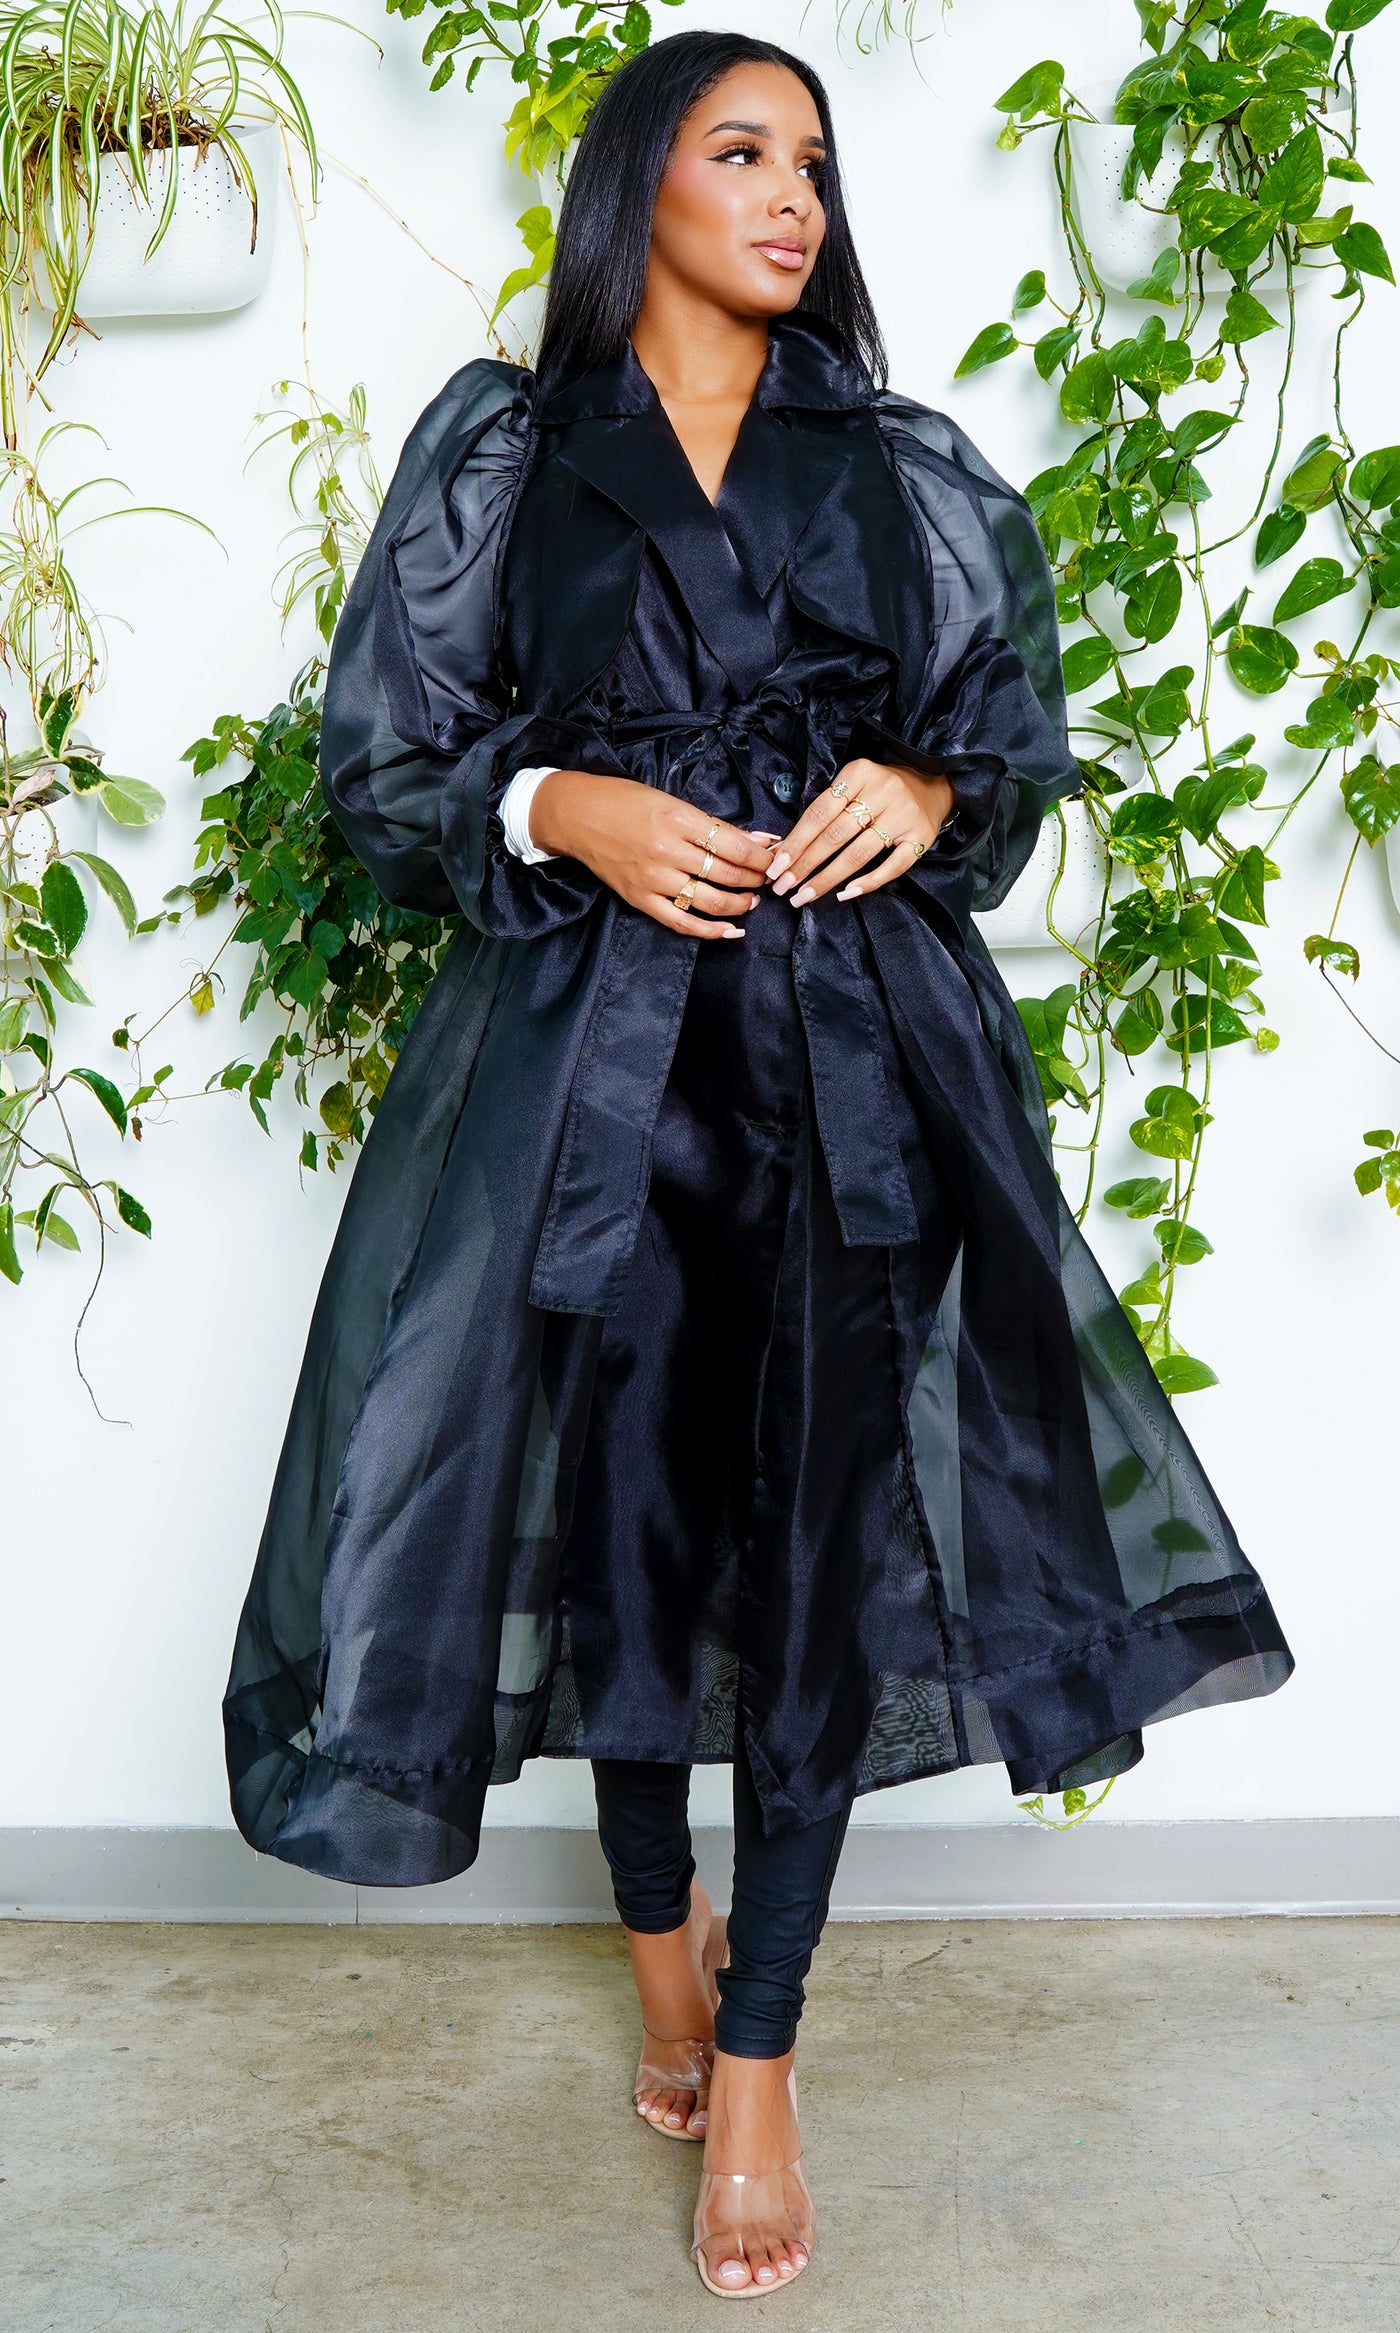 The 'Drama' Black Organza Coat - Cutely Covered